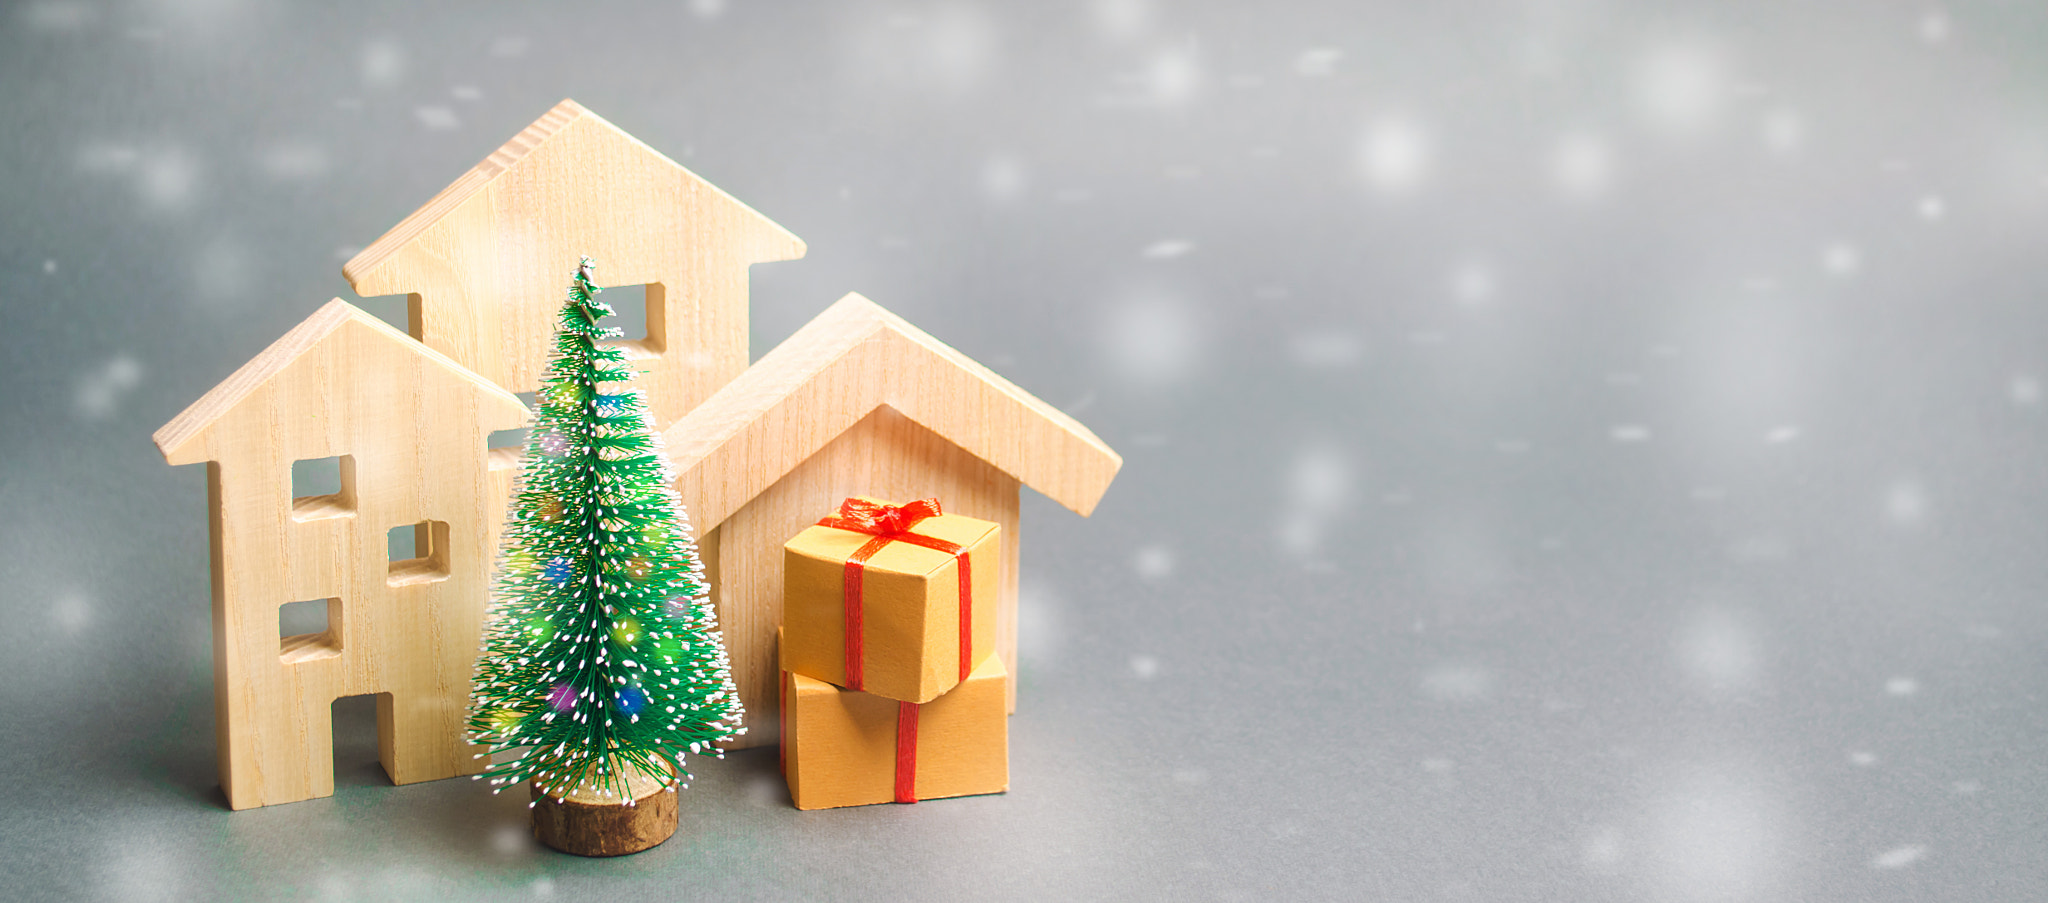 Wooden houses, Christmas tree and gifts. Holiday. Winter vacation. Christmas Sale of Real Estate. Ne